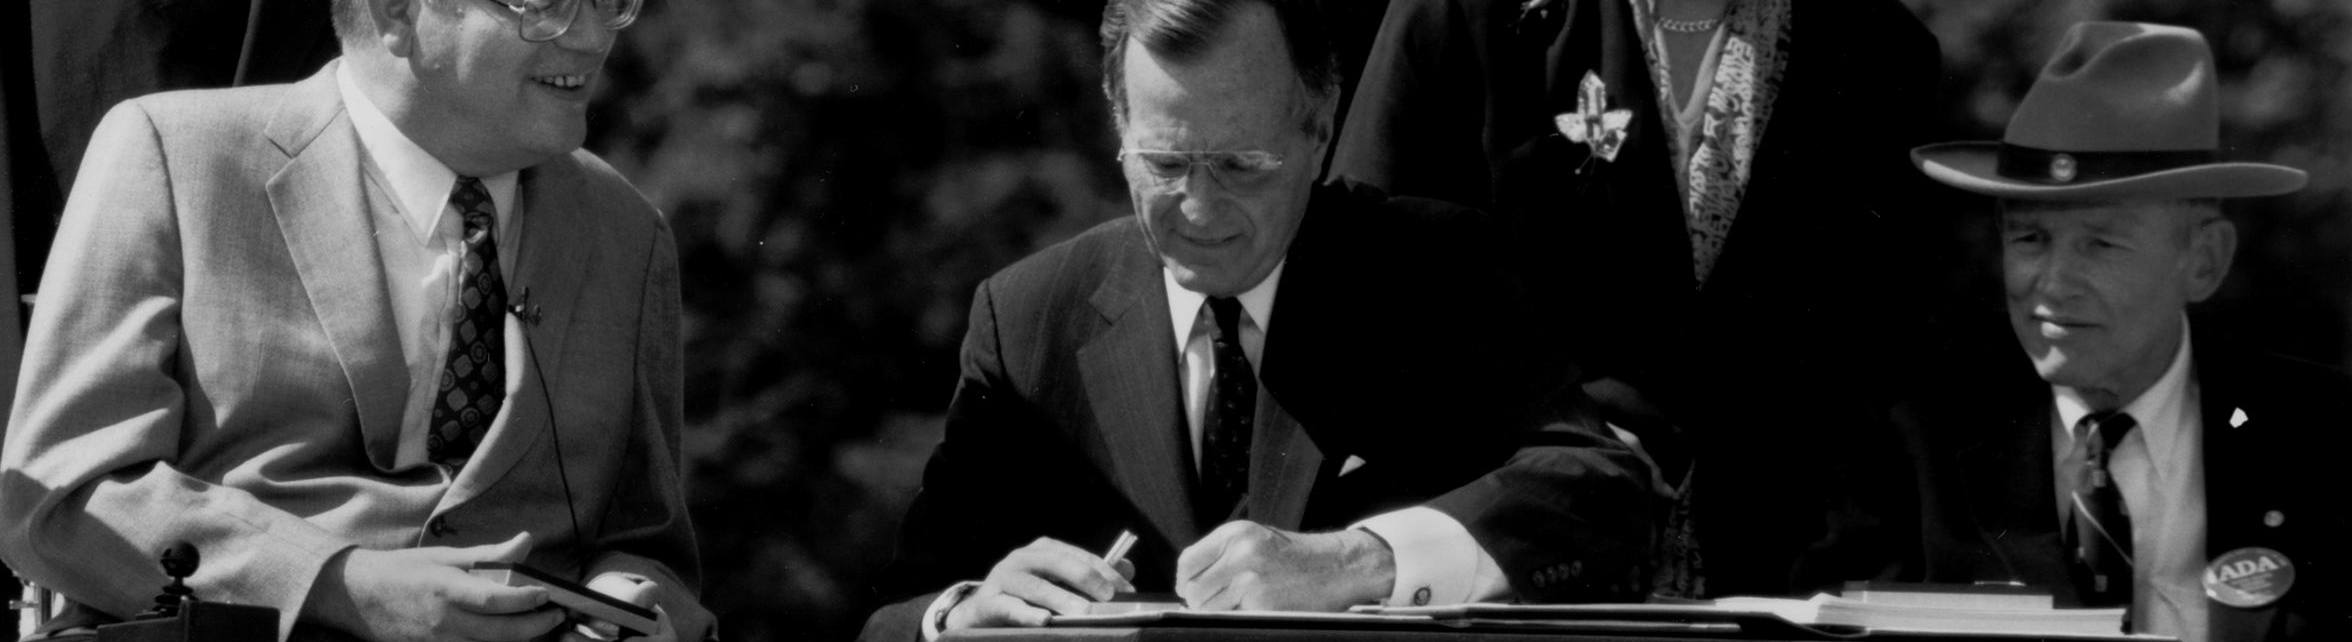 President George H. W. Bush signs the ADA into law 1990